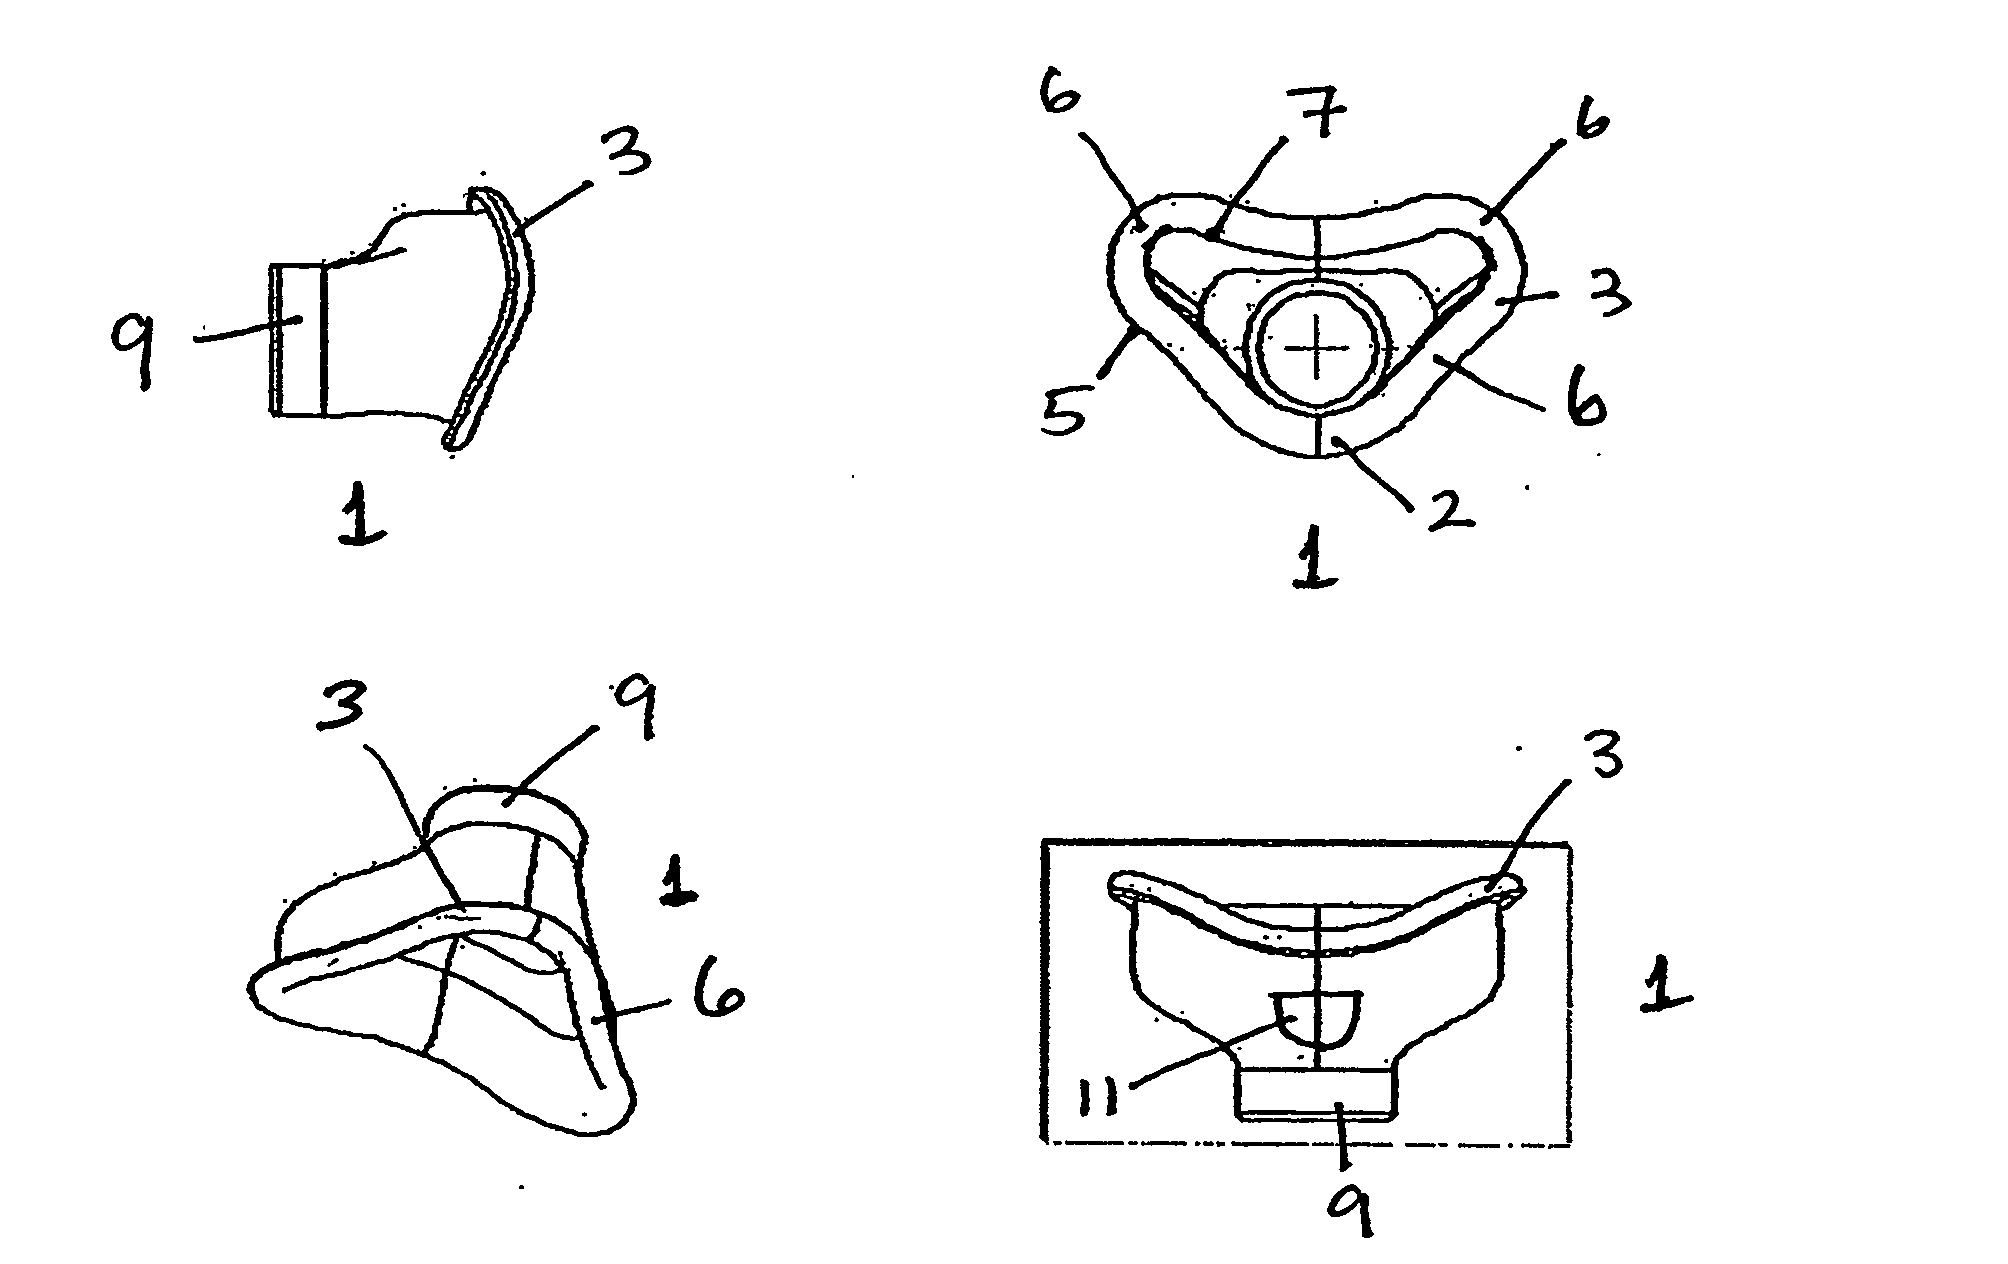 Nasal adapter for the base of the nose